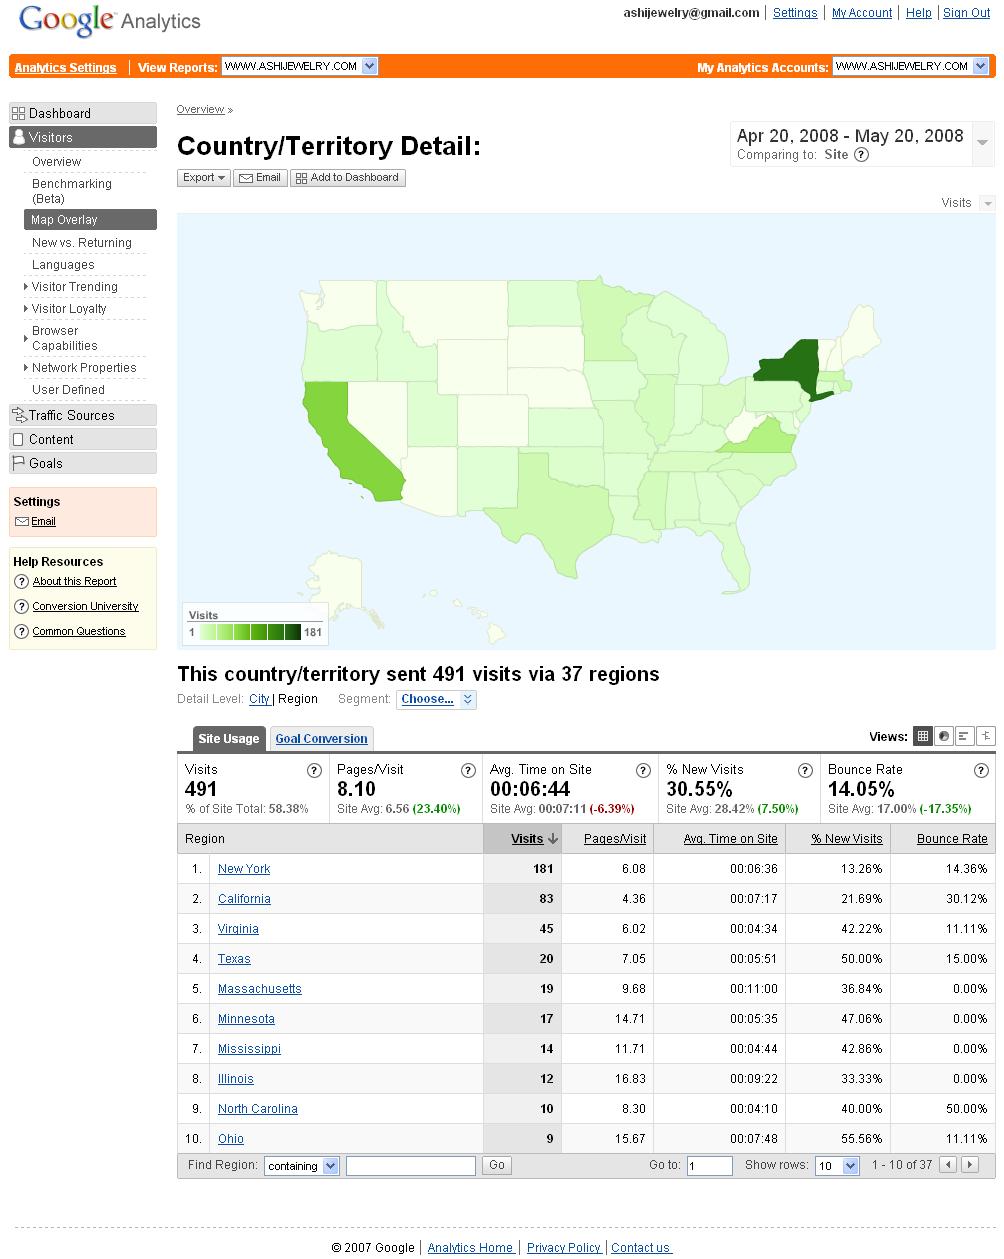 14) Google Analytics Dashboard Reports Map Overlay (Part 1) This report shows you where your visitors are located geographically along with the information relative to site usage and goal conversions.